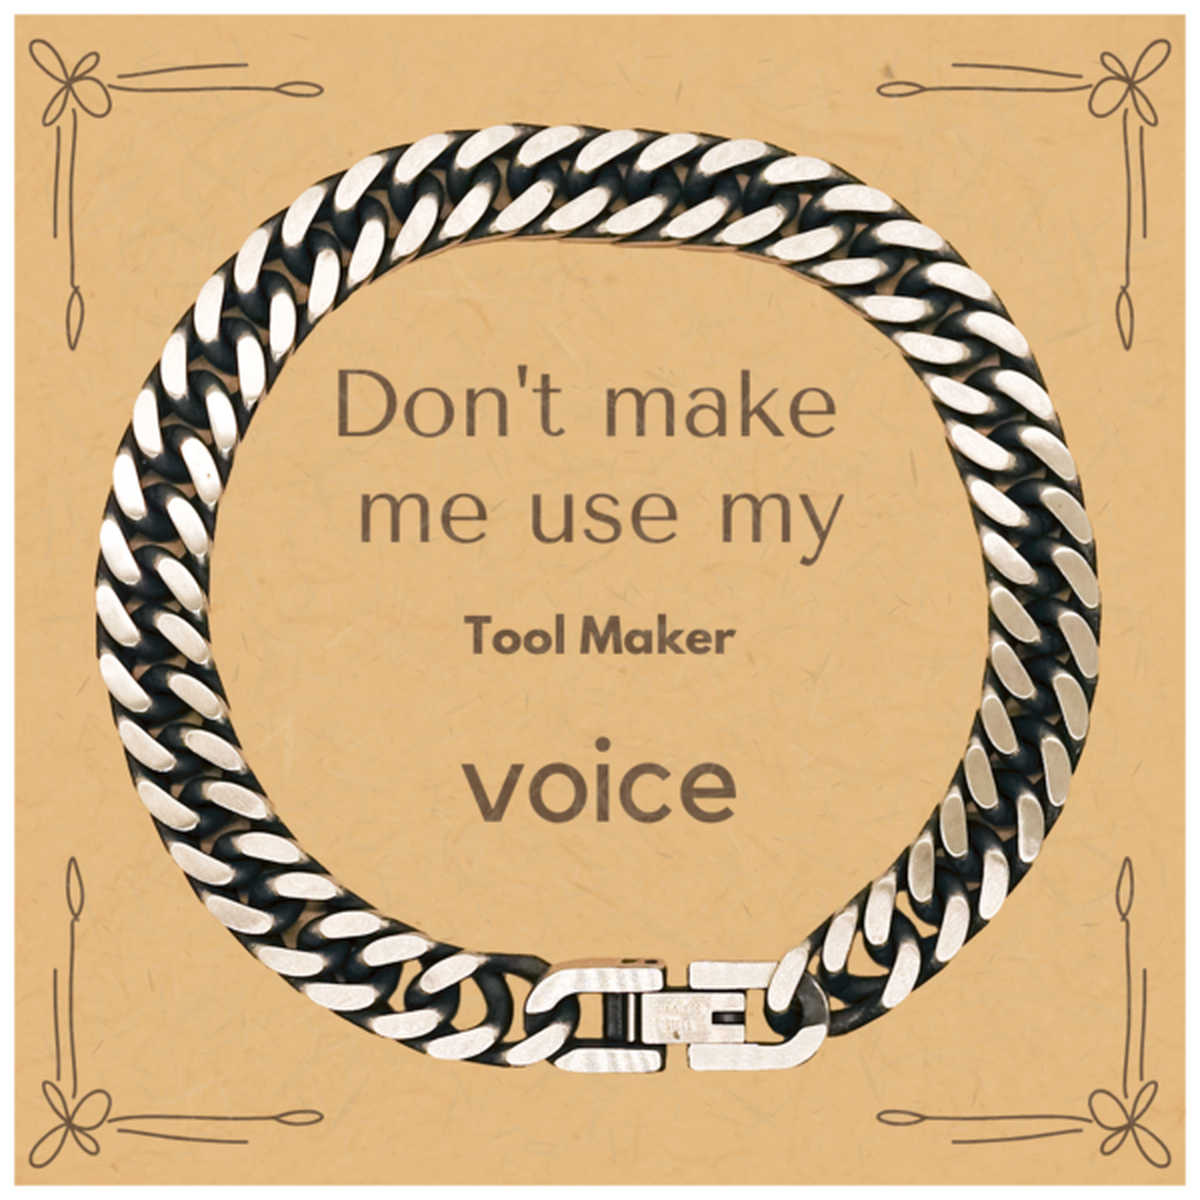 Don't make me use my Tool Maker voice, Sarcasm Tool Maker Card Gifts, Christmas Tool Maker Cuban Link Chain Bracelet Birthday Unique Gifts For Tool Maker Coworkers, Men, Women, Colleague, Friends